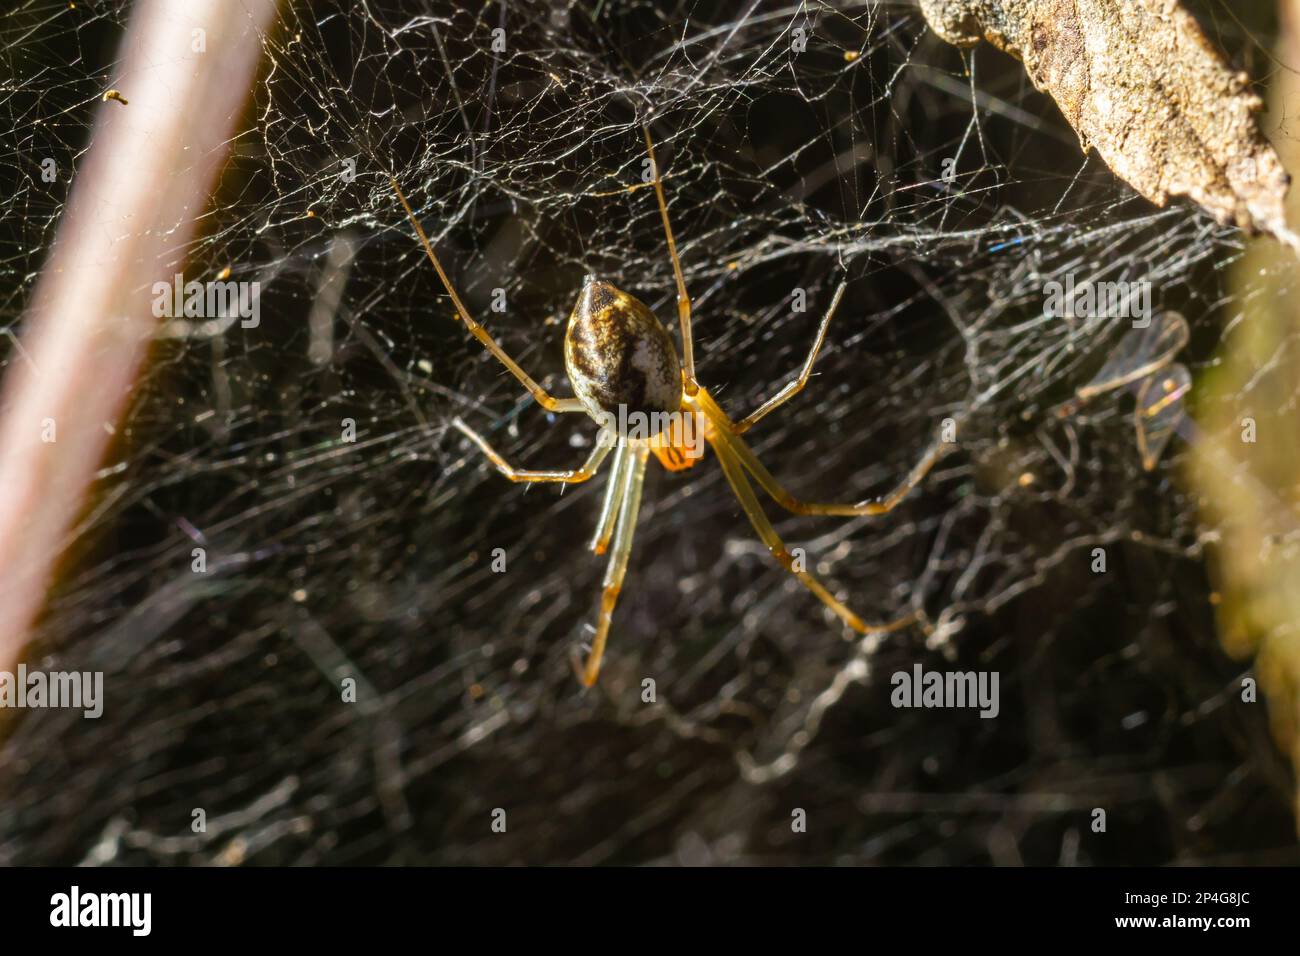 Neriene peltata is a species of spider belonging to the family Linyphiidae. Stock Photo